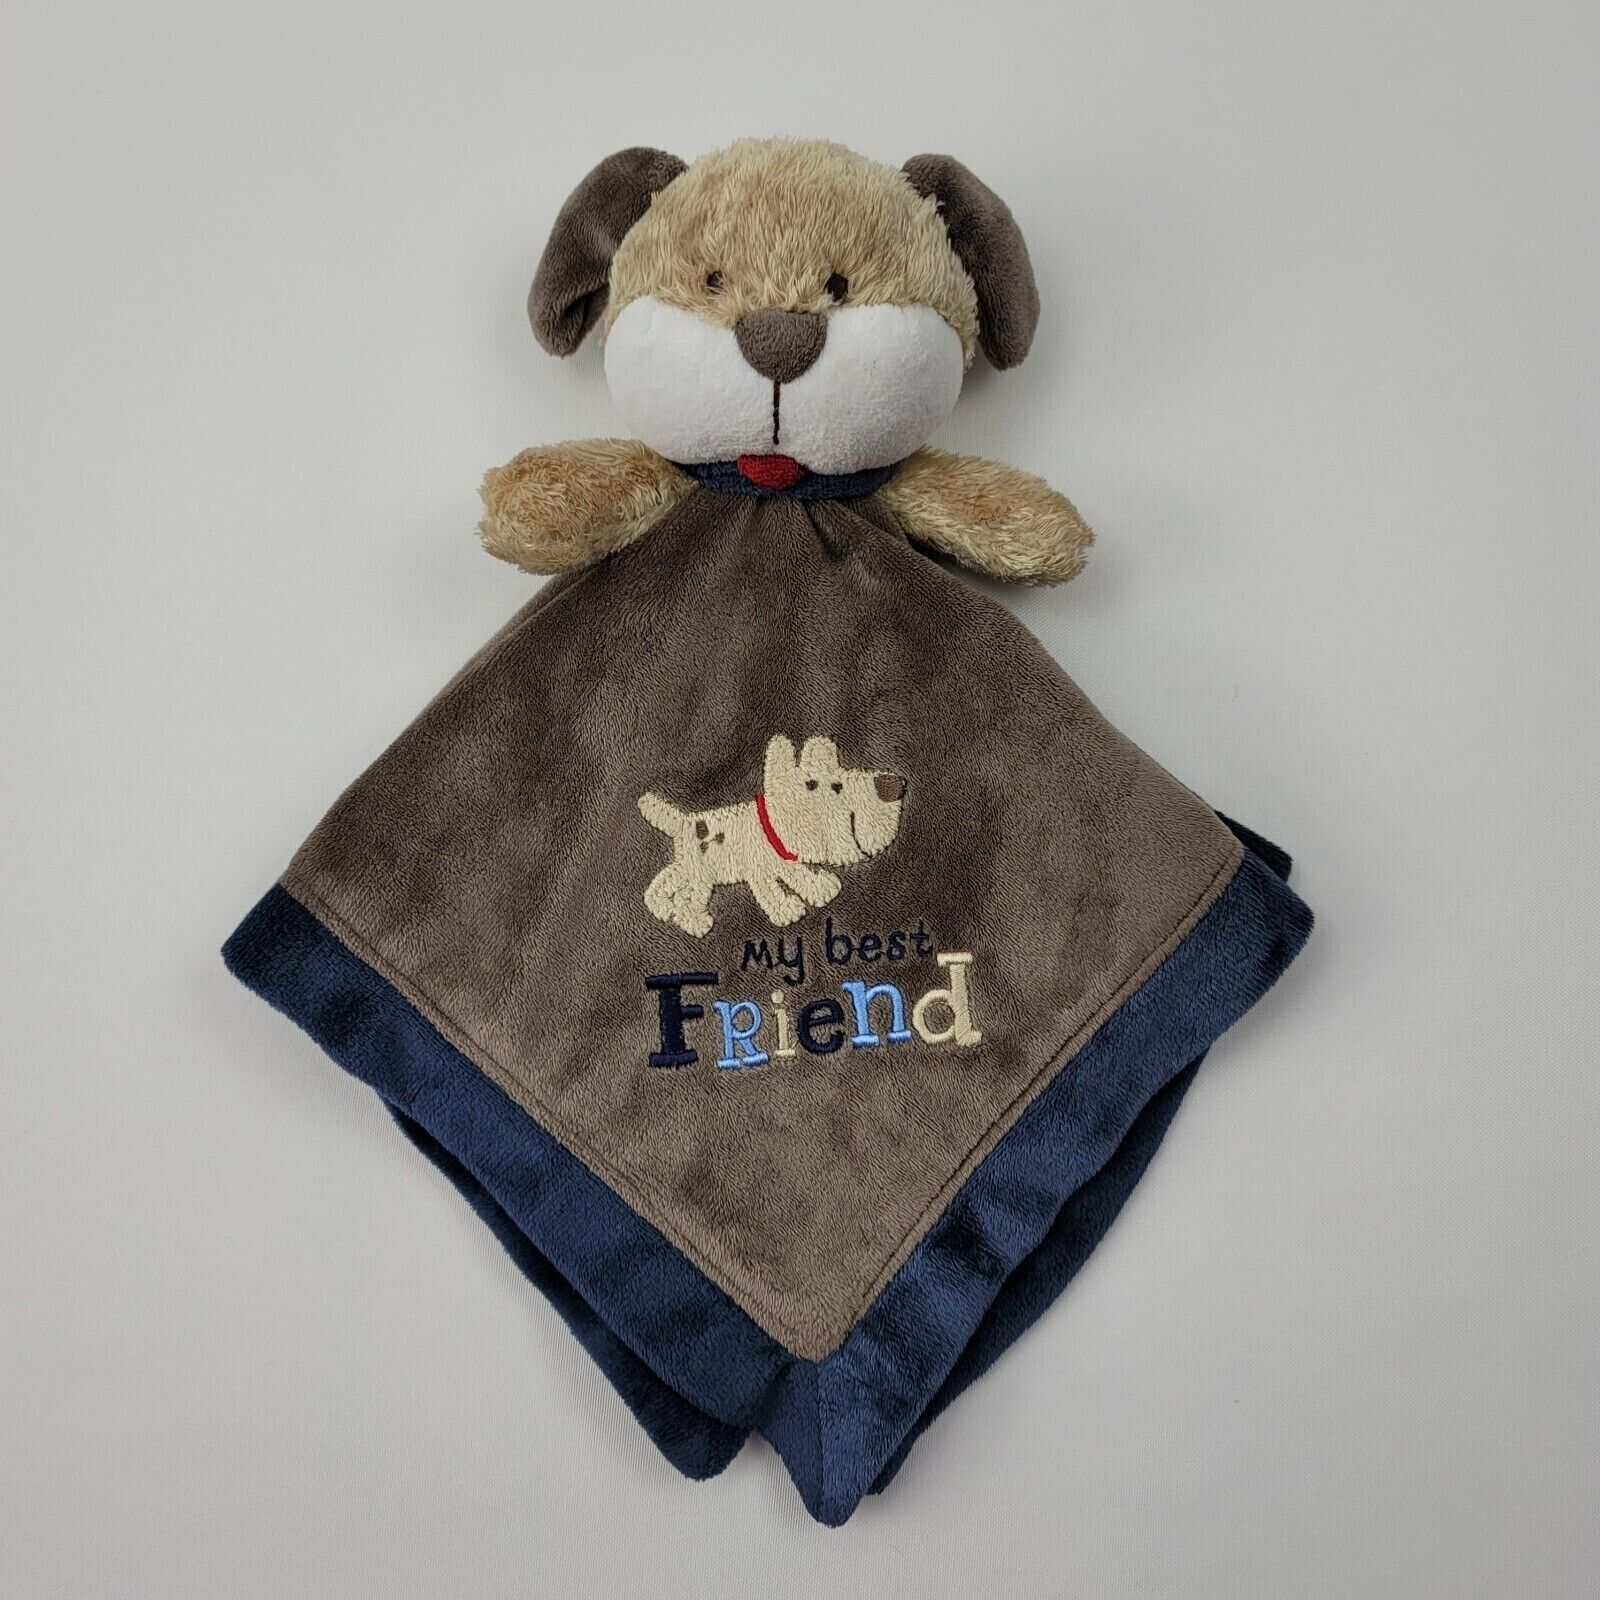 Primary image for Carter's Tan Dog Security Blanket "My Best Friend" Rattle Navy Blue Brown Satin